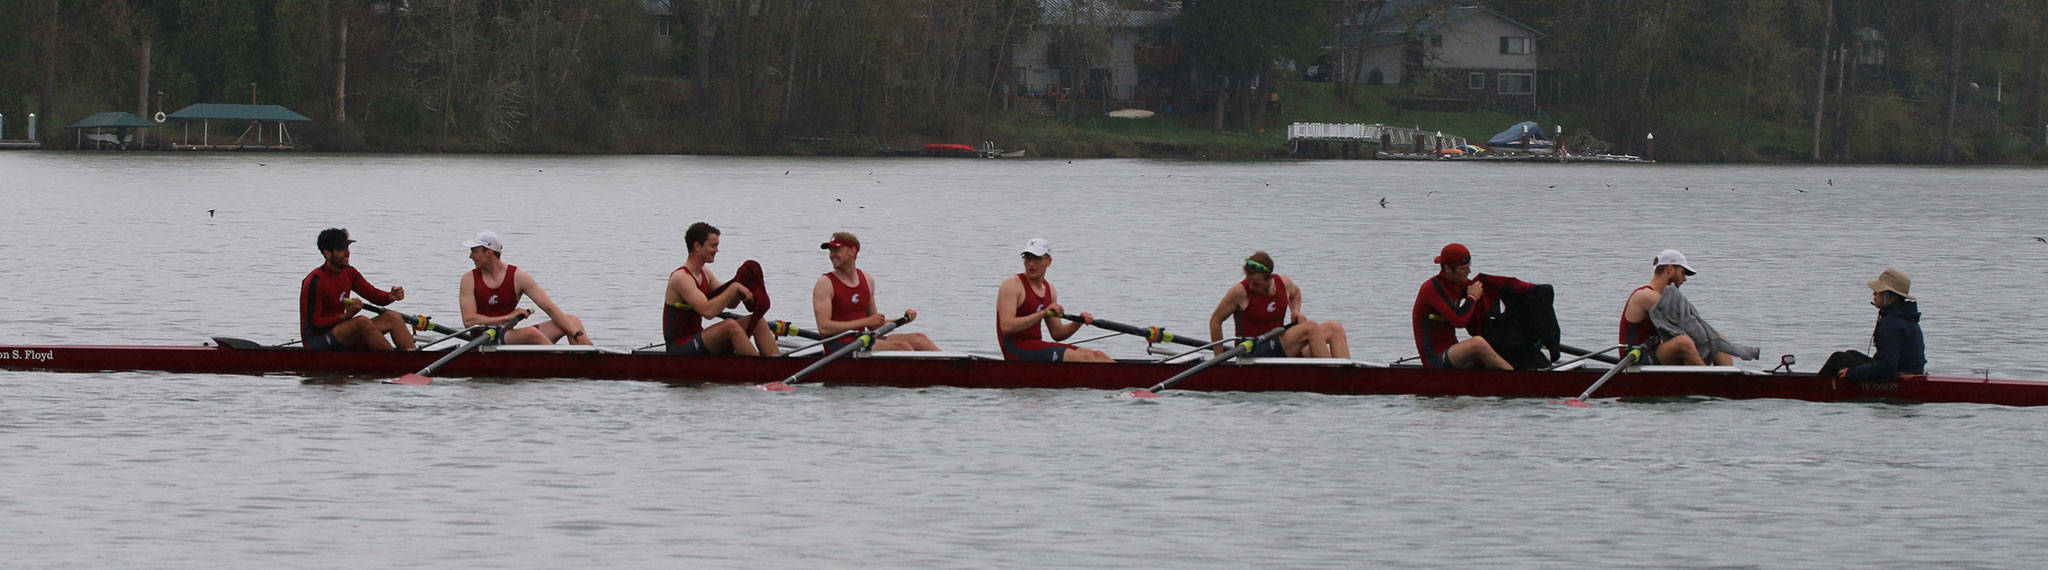 Bjorn Elliot, fourth from the left, rowed in Washington State’s varsity eight boat this spring. (Photo courtesy of WSU Rowing)